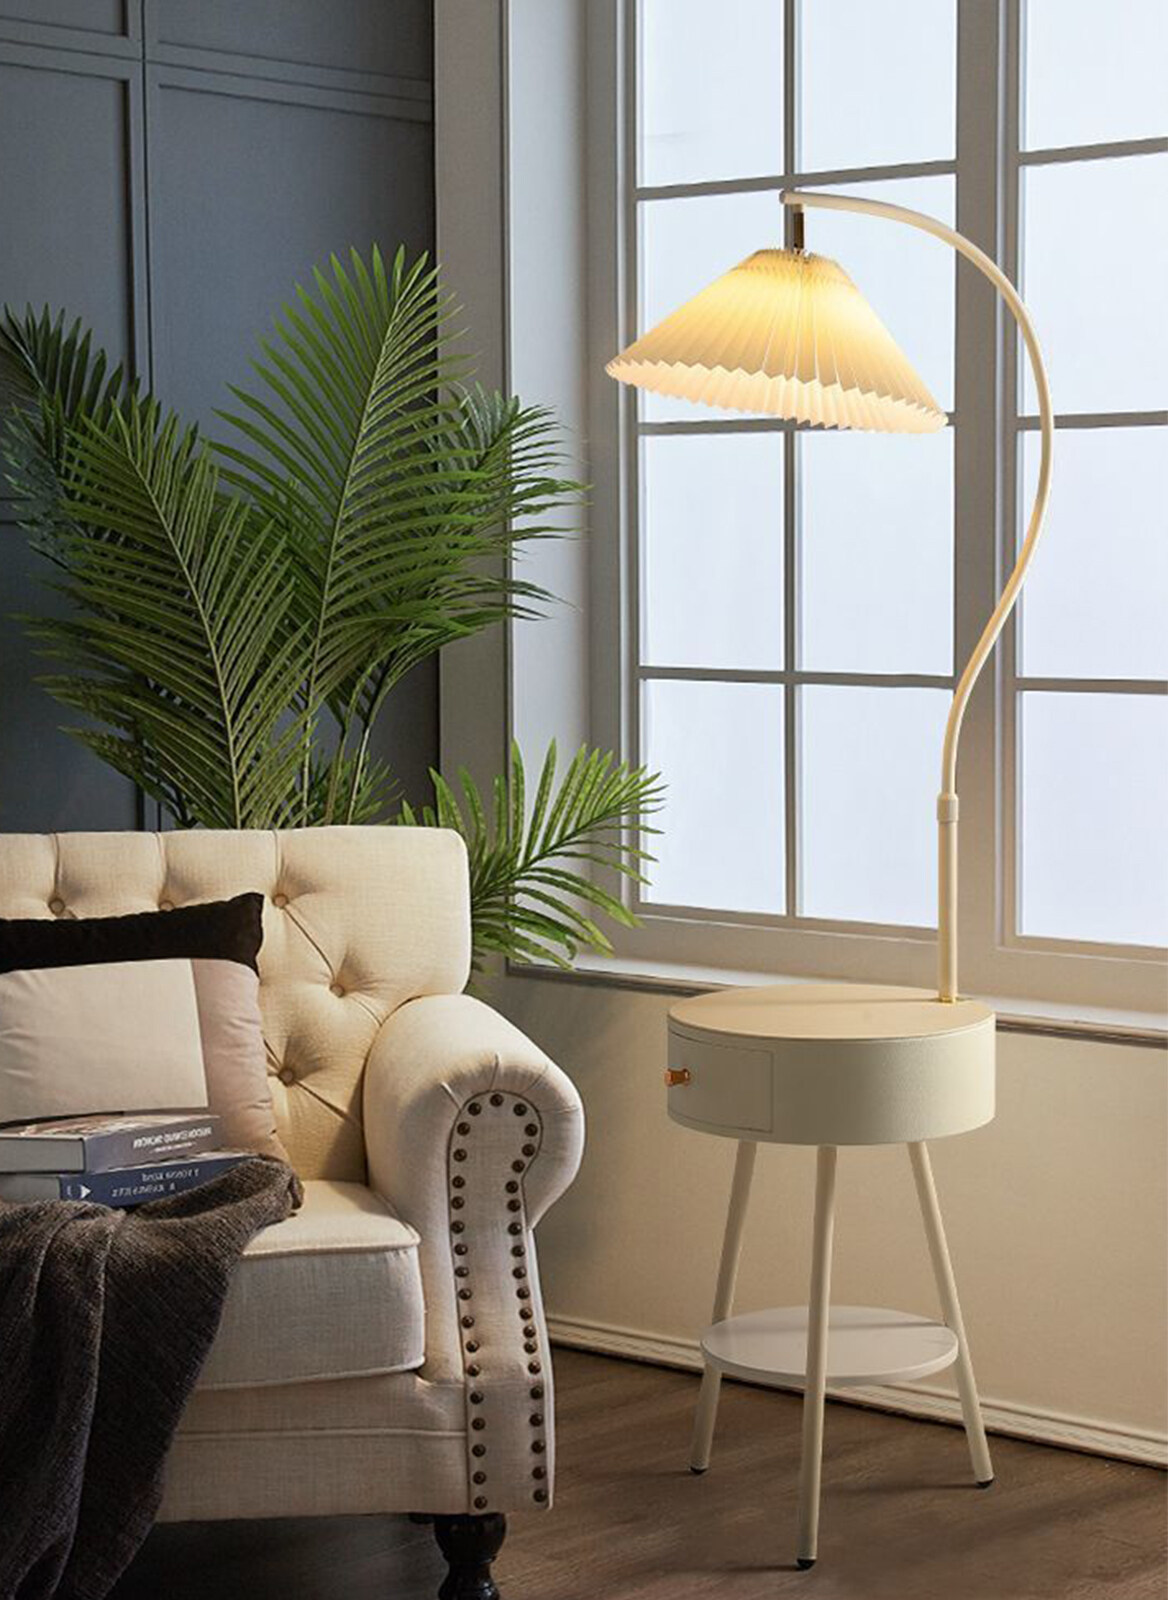 3-Color Light LED Cream Style Pleated Shade Floor Lamp with White Drawer, Height Adjustable